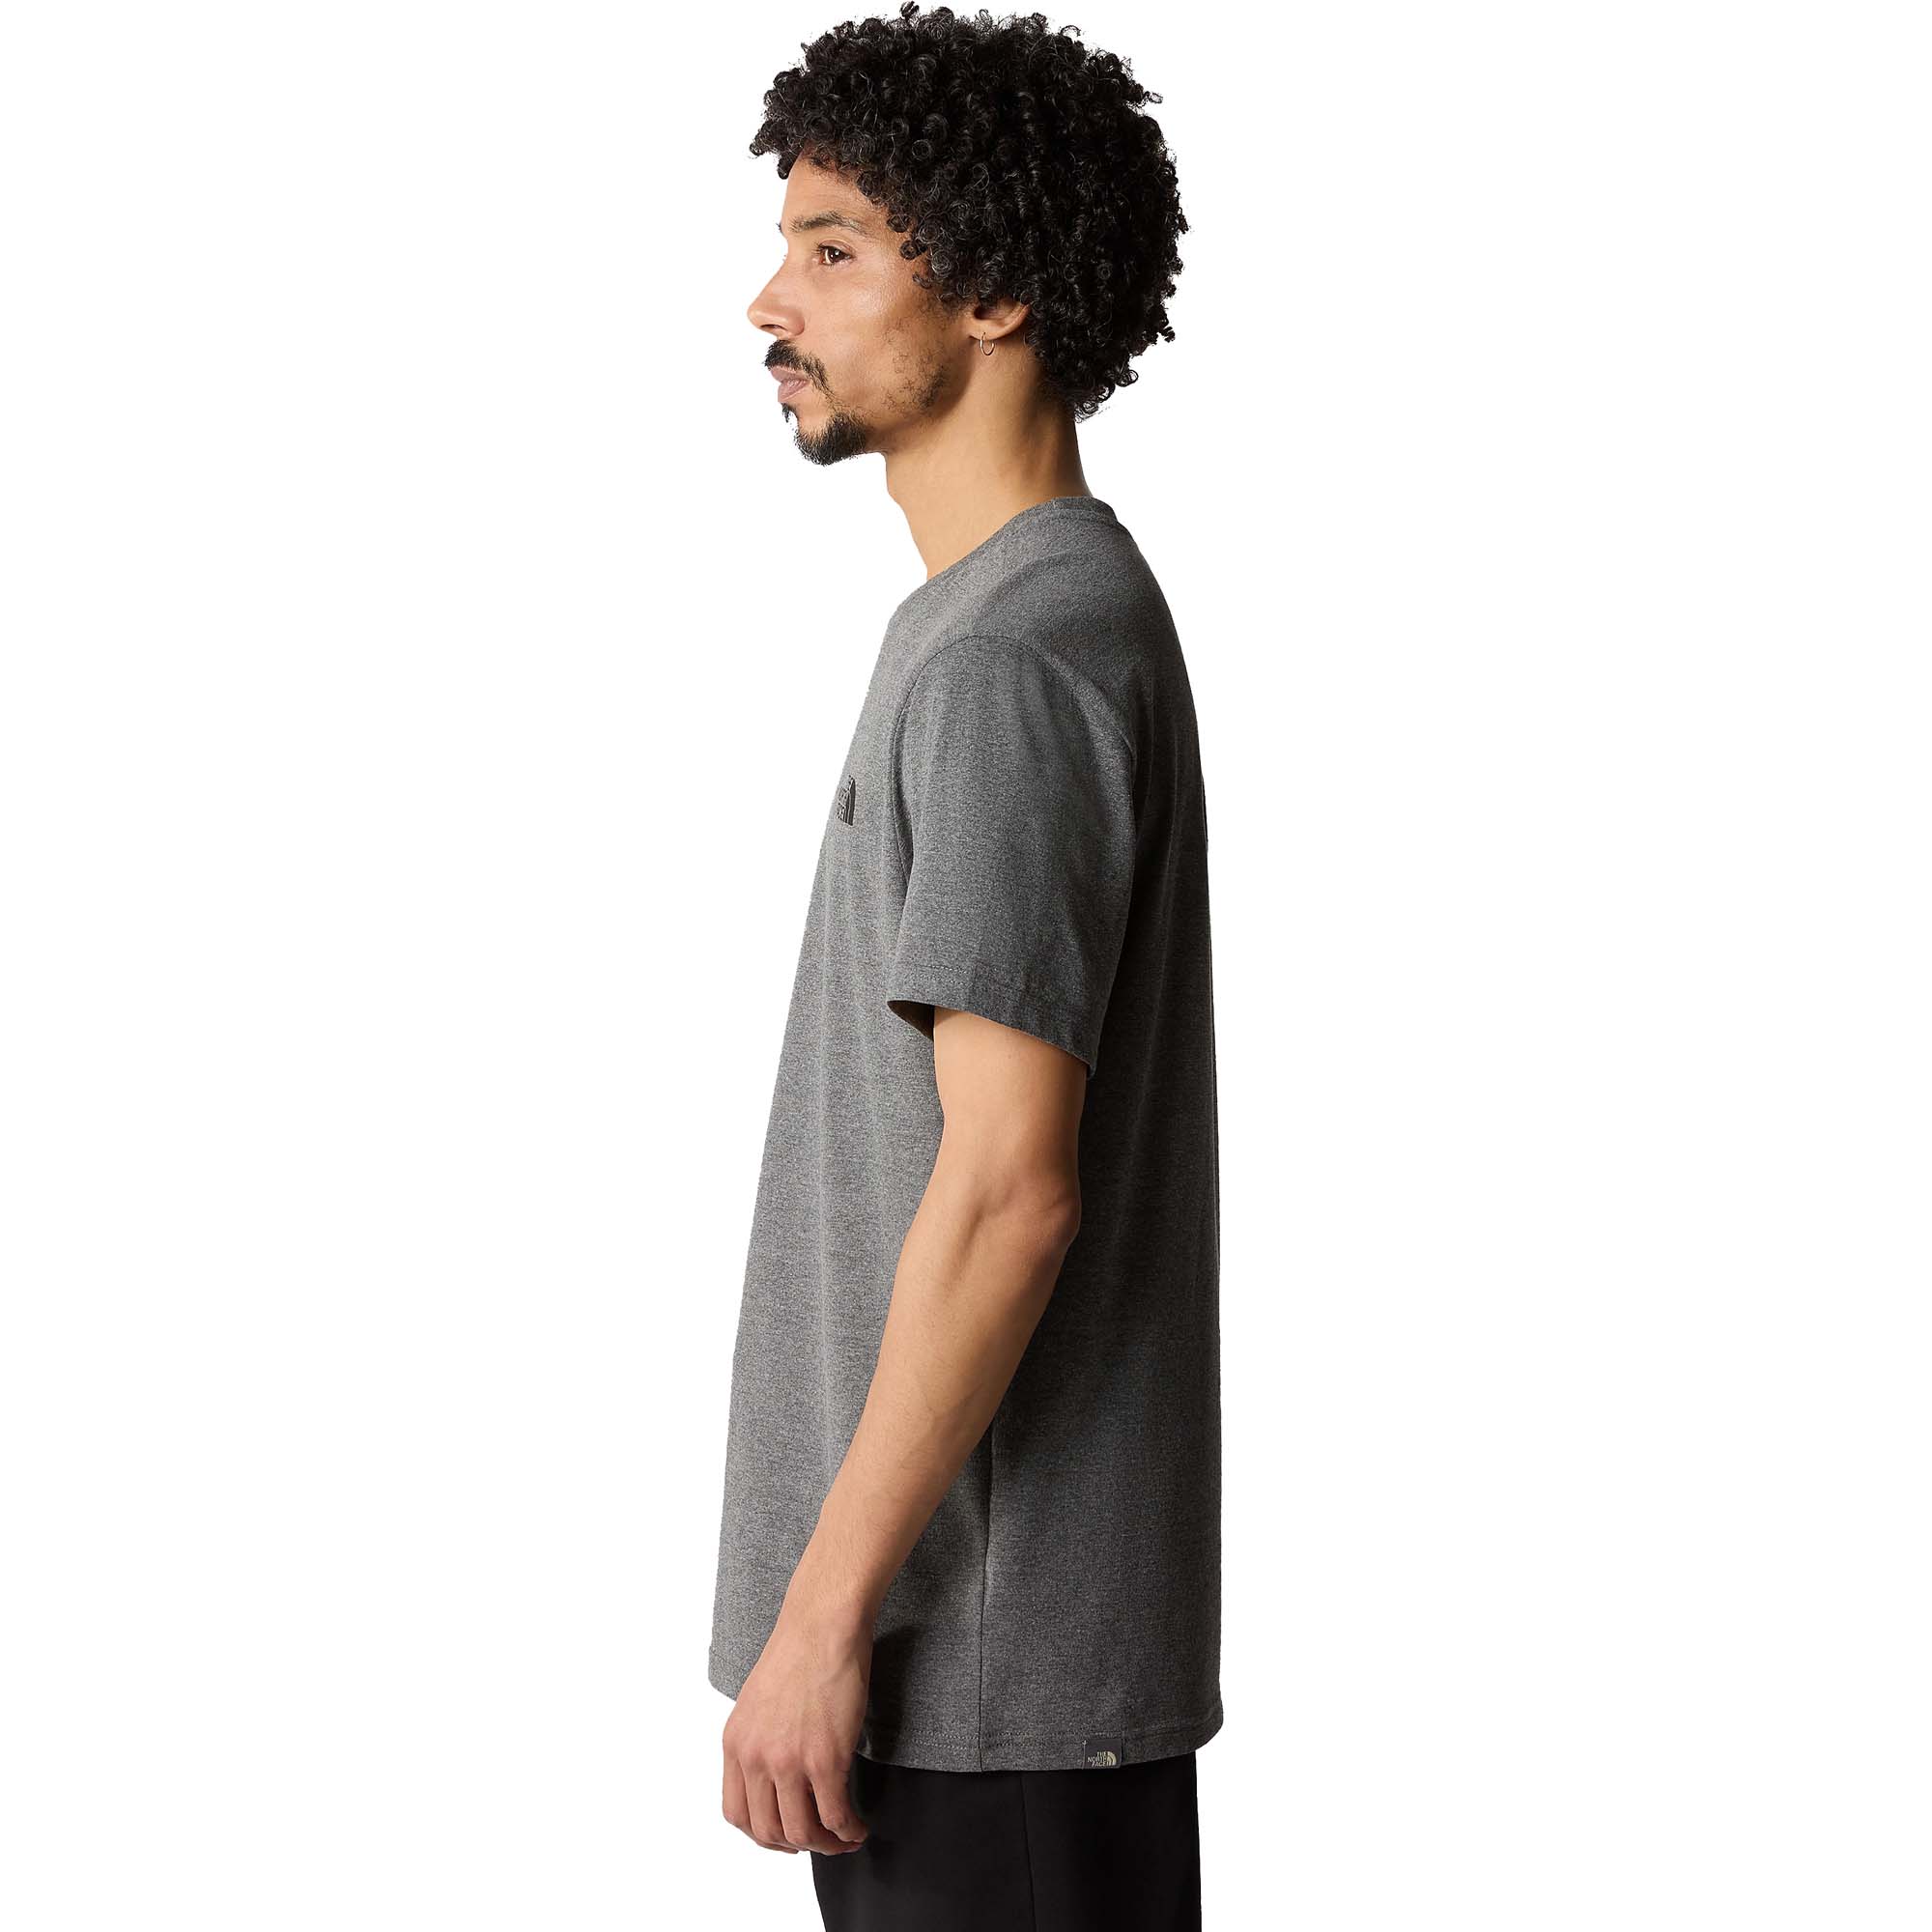 The North Face Simple Dome Men's Short Sleeve T-Shirt